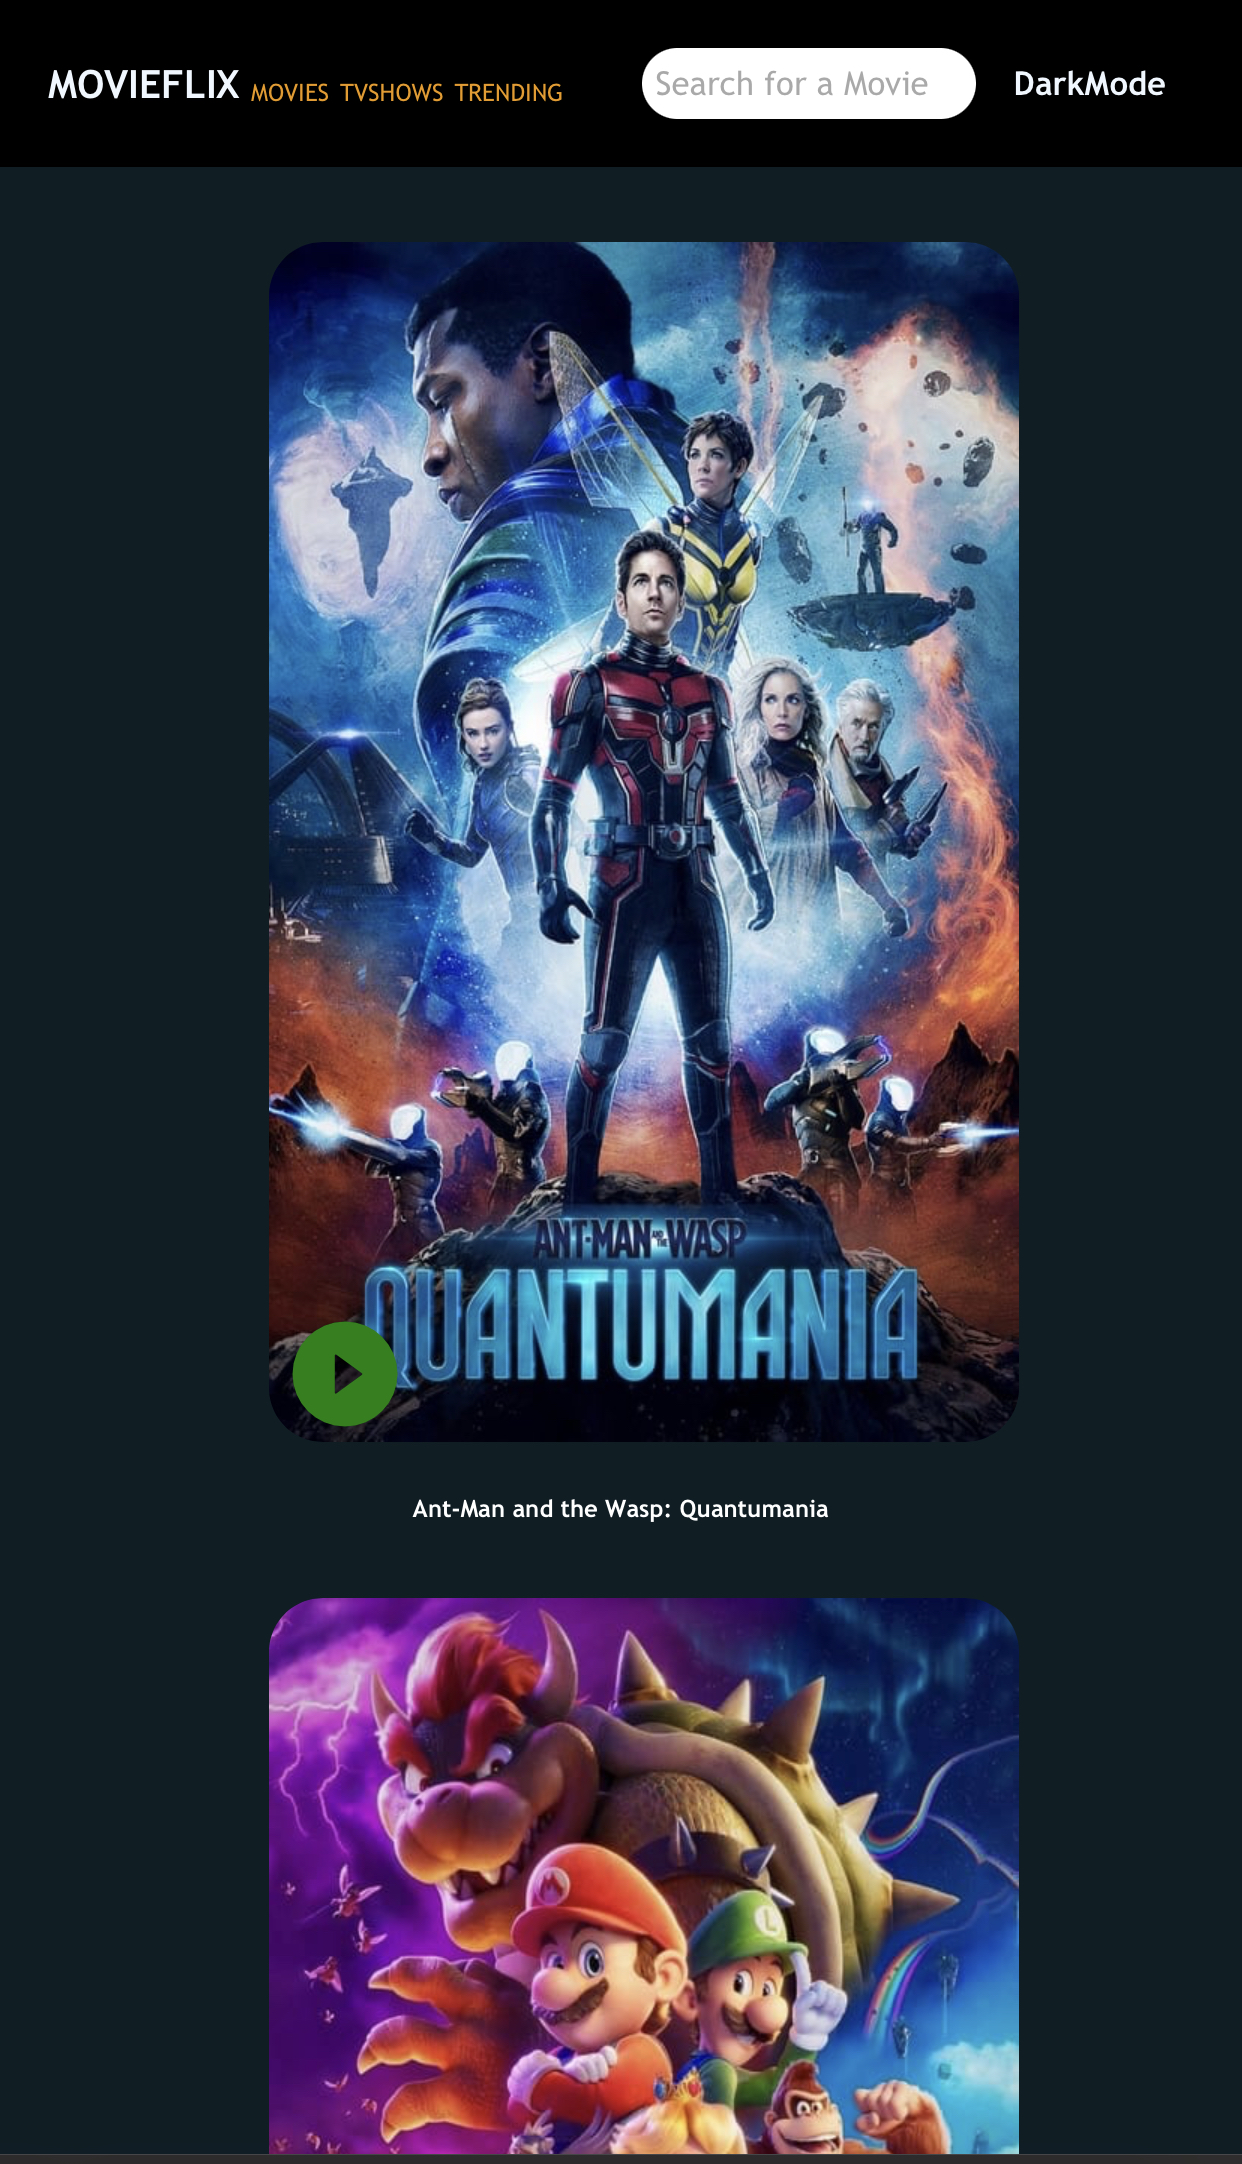 MOVIEFLIX nmovies TvsHows TRENDING (search for a Movie J DarkMode

   

  

% BF a I eg

BT [7

Ant-Man and the Wasp: Quantumania

iy